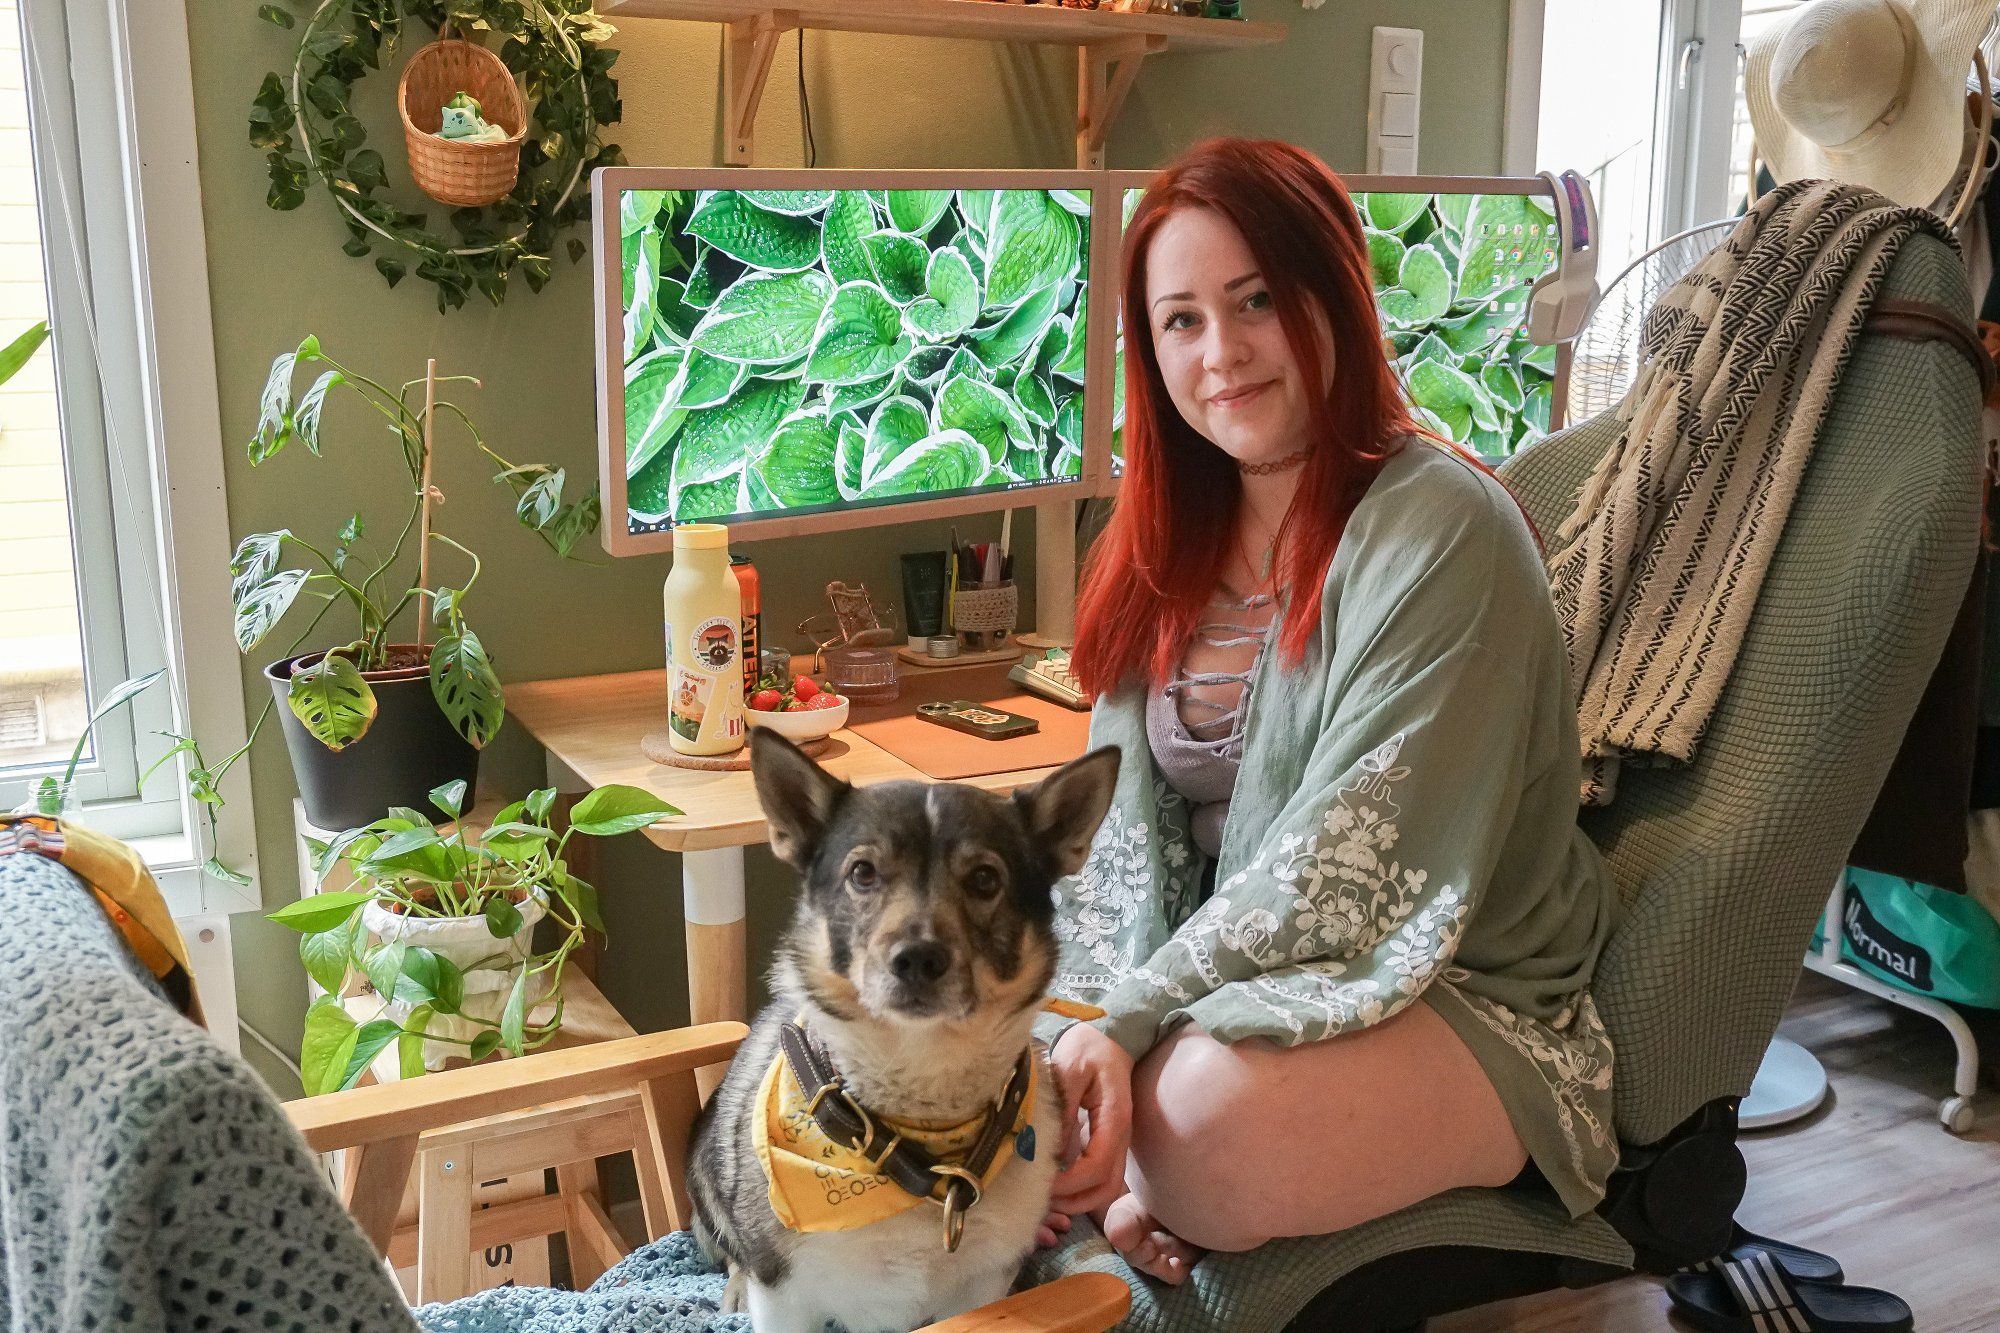 Tanja Renate Aakerøy in her green home office with her dog Atlas